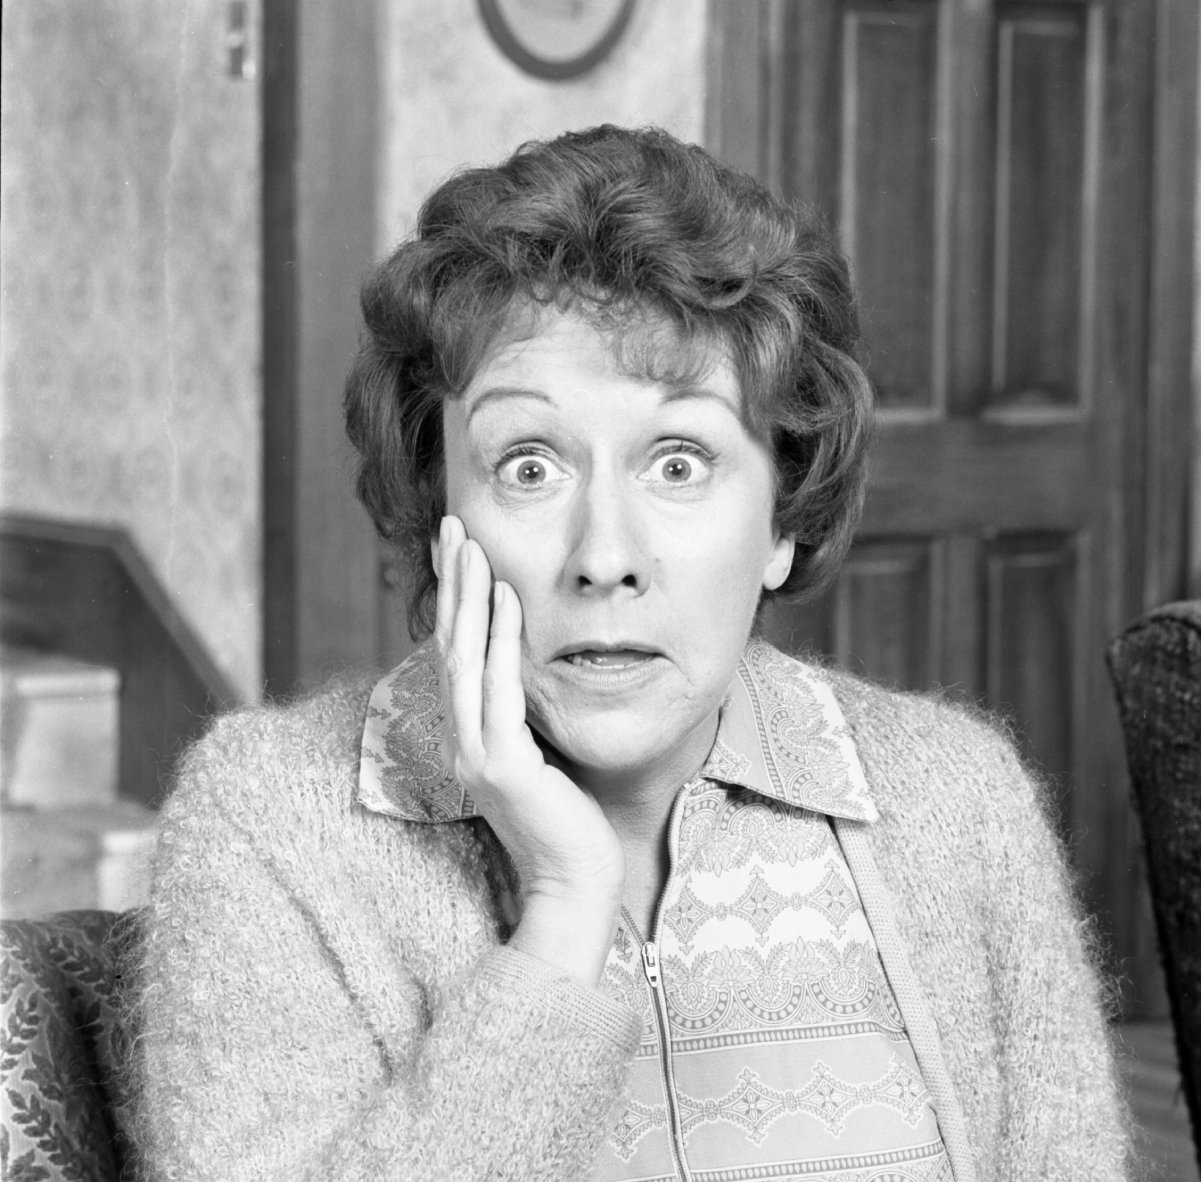 Actor Jean Stapleton strikes a surprised pose, hand on cheek, for a photo as 'All in the Family's Edith Bunker